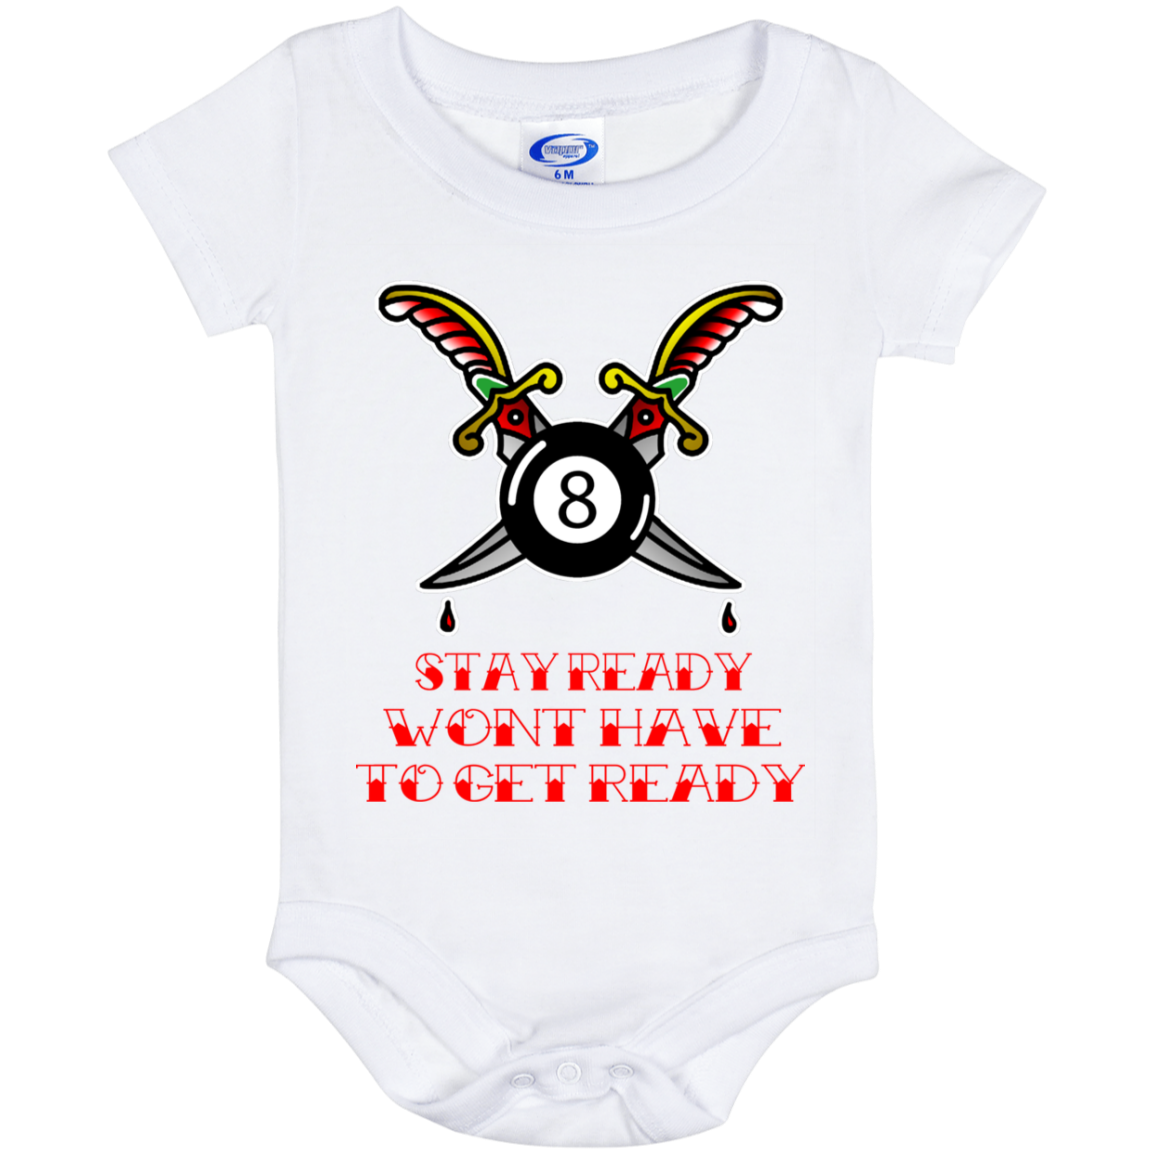 The GHOATS Custom Design #36. Stay Ready Won't Have to Get Ready. Tattoo Style. Ver. 1/2. Baby Onesie 6 Month